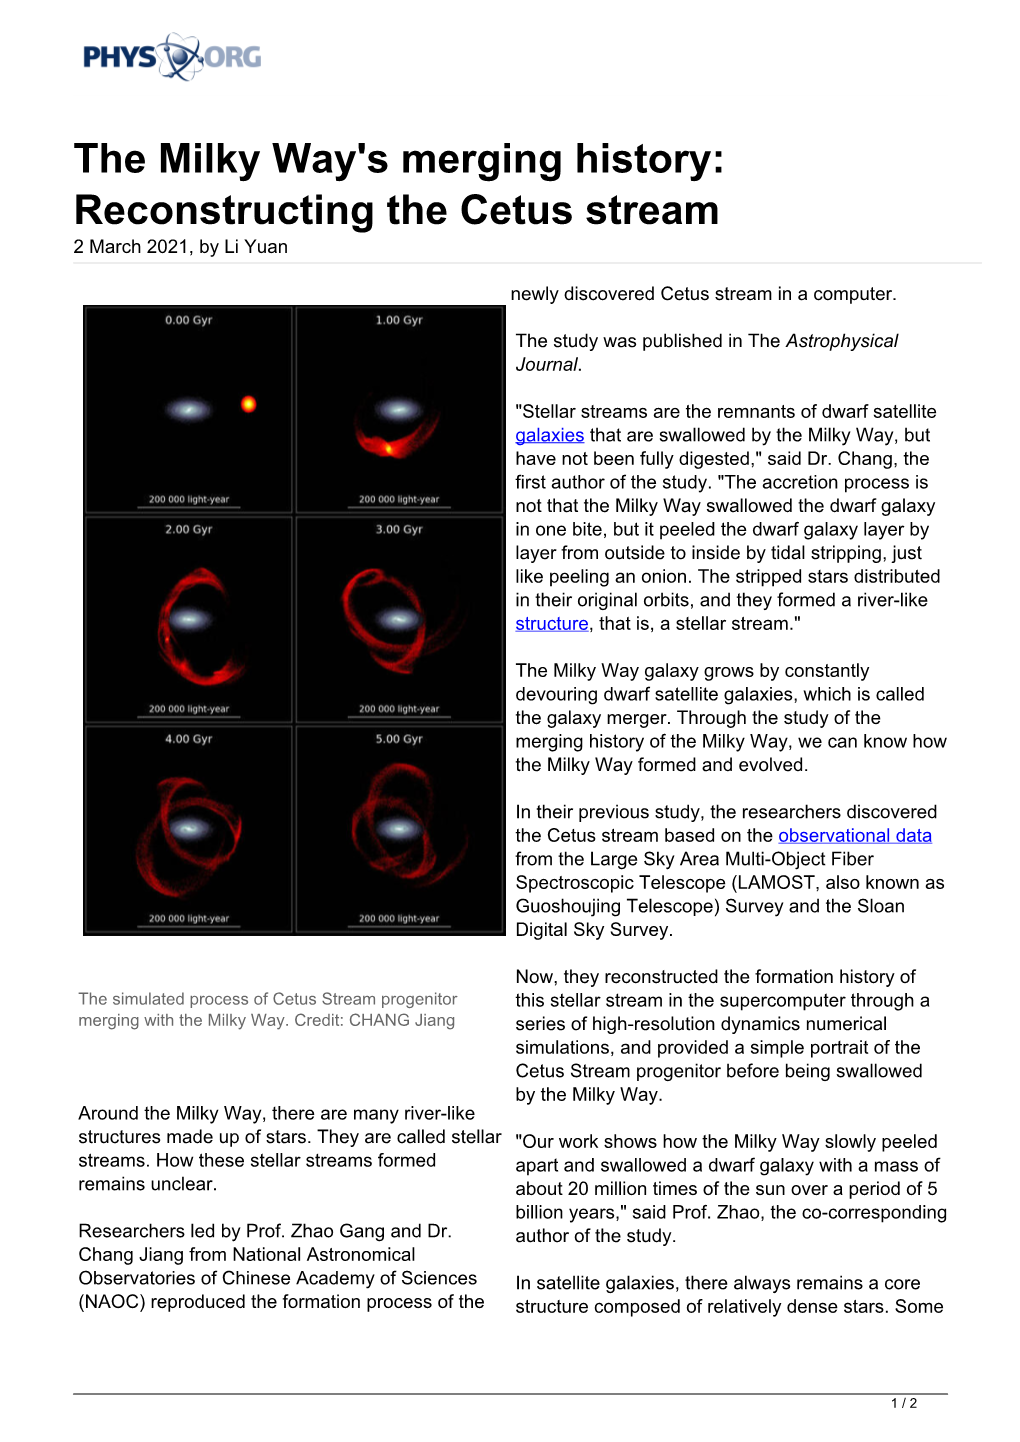 The Milky Way's Merging History: Reconstructing the Cetus Stream 2 March 2021, by Li Yuan